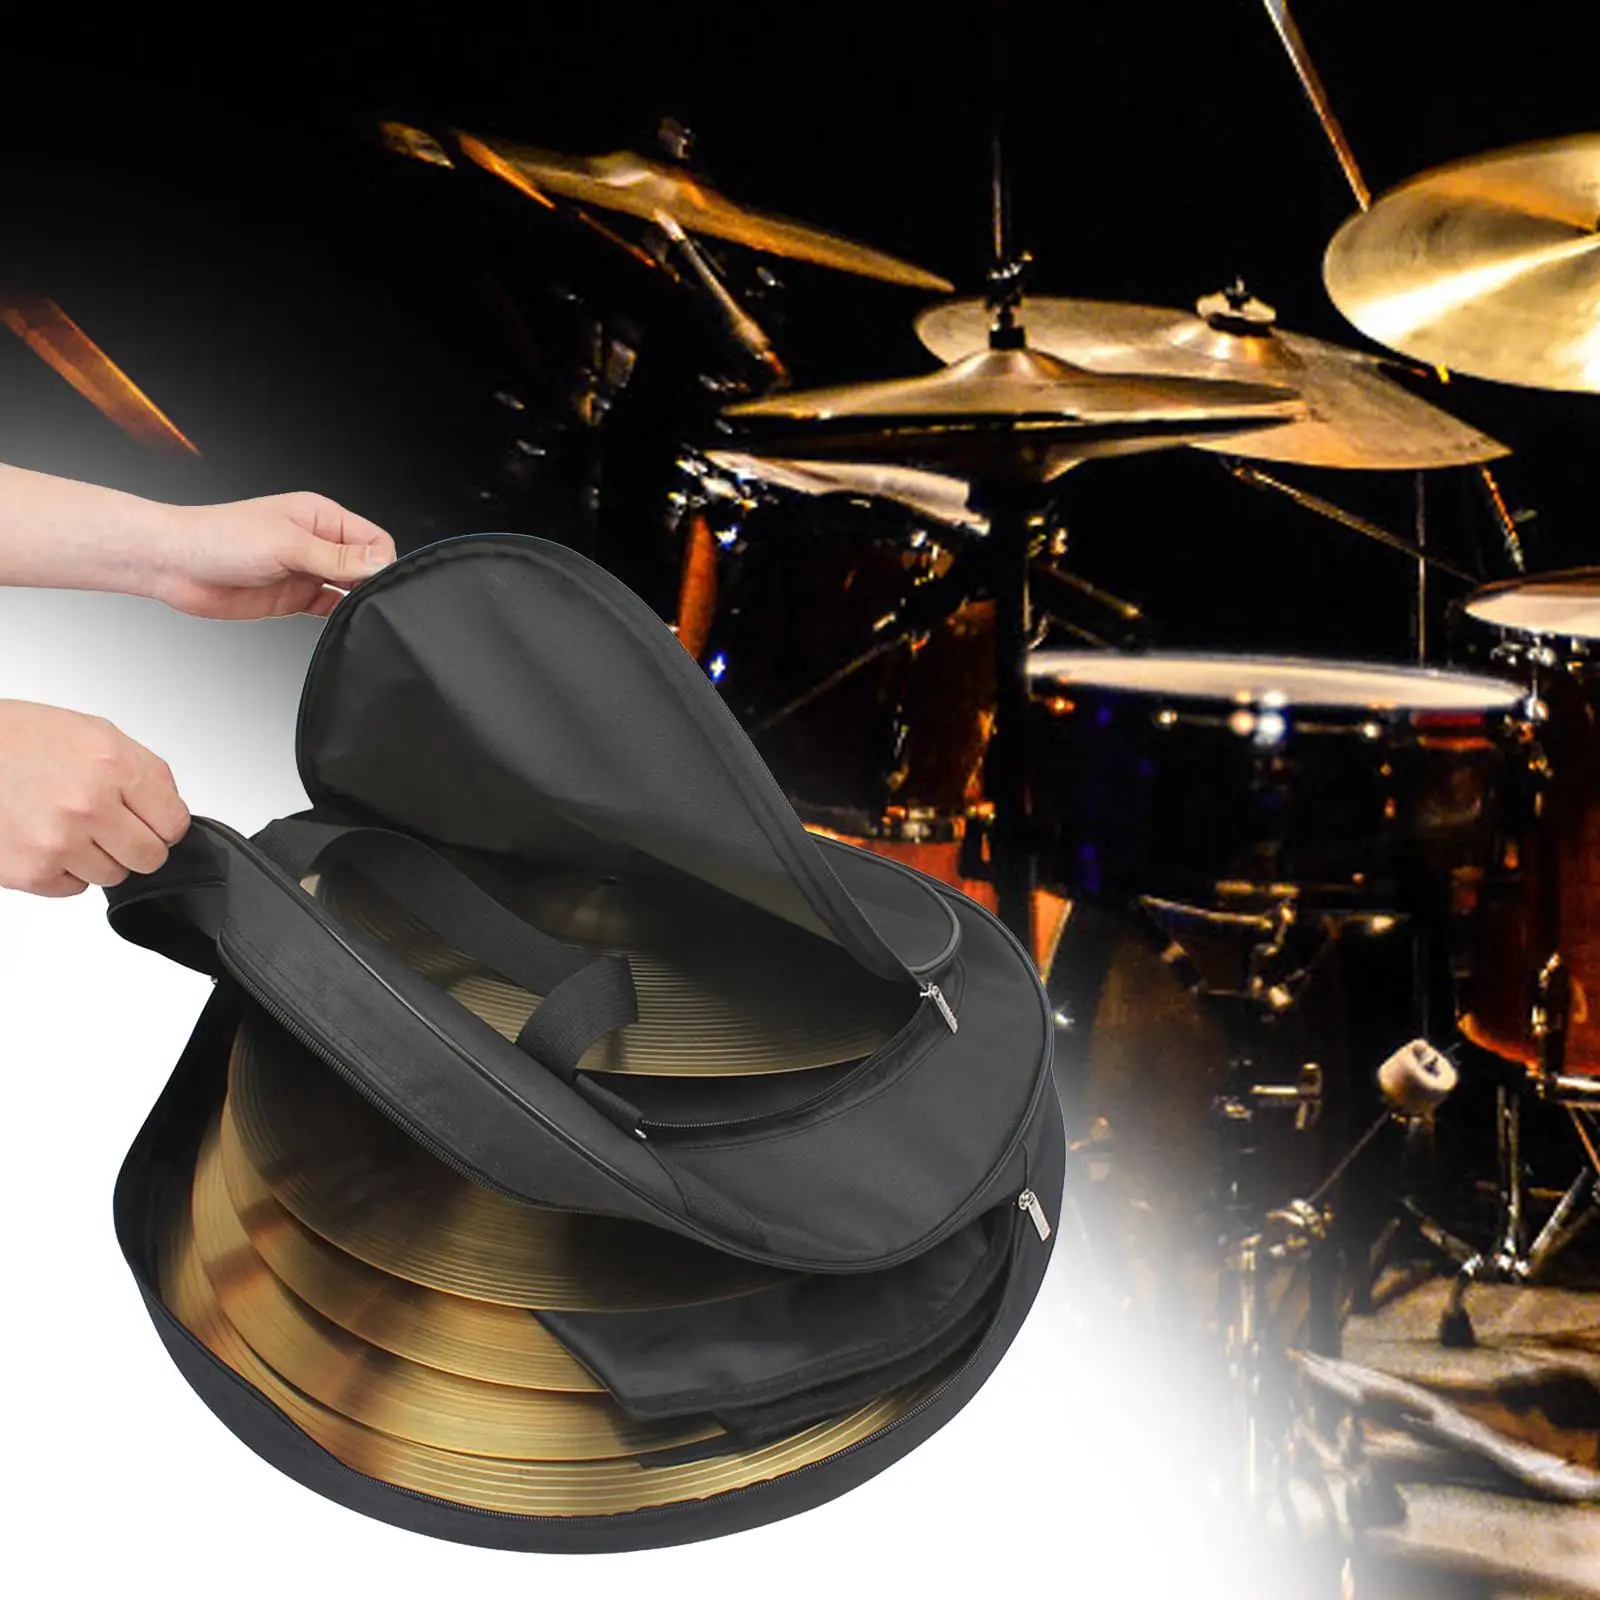 21 inch Cymbal Bag Multifunction Cymbal Carrying Case Cymbal Holder Pouch Cymbal Handbag for Drum Instrument Accessories Cymbal